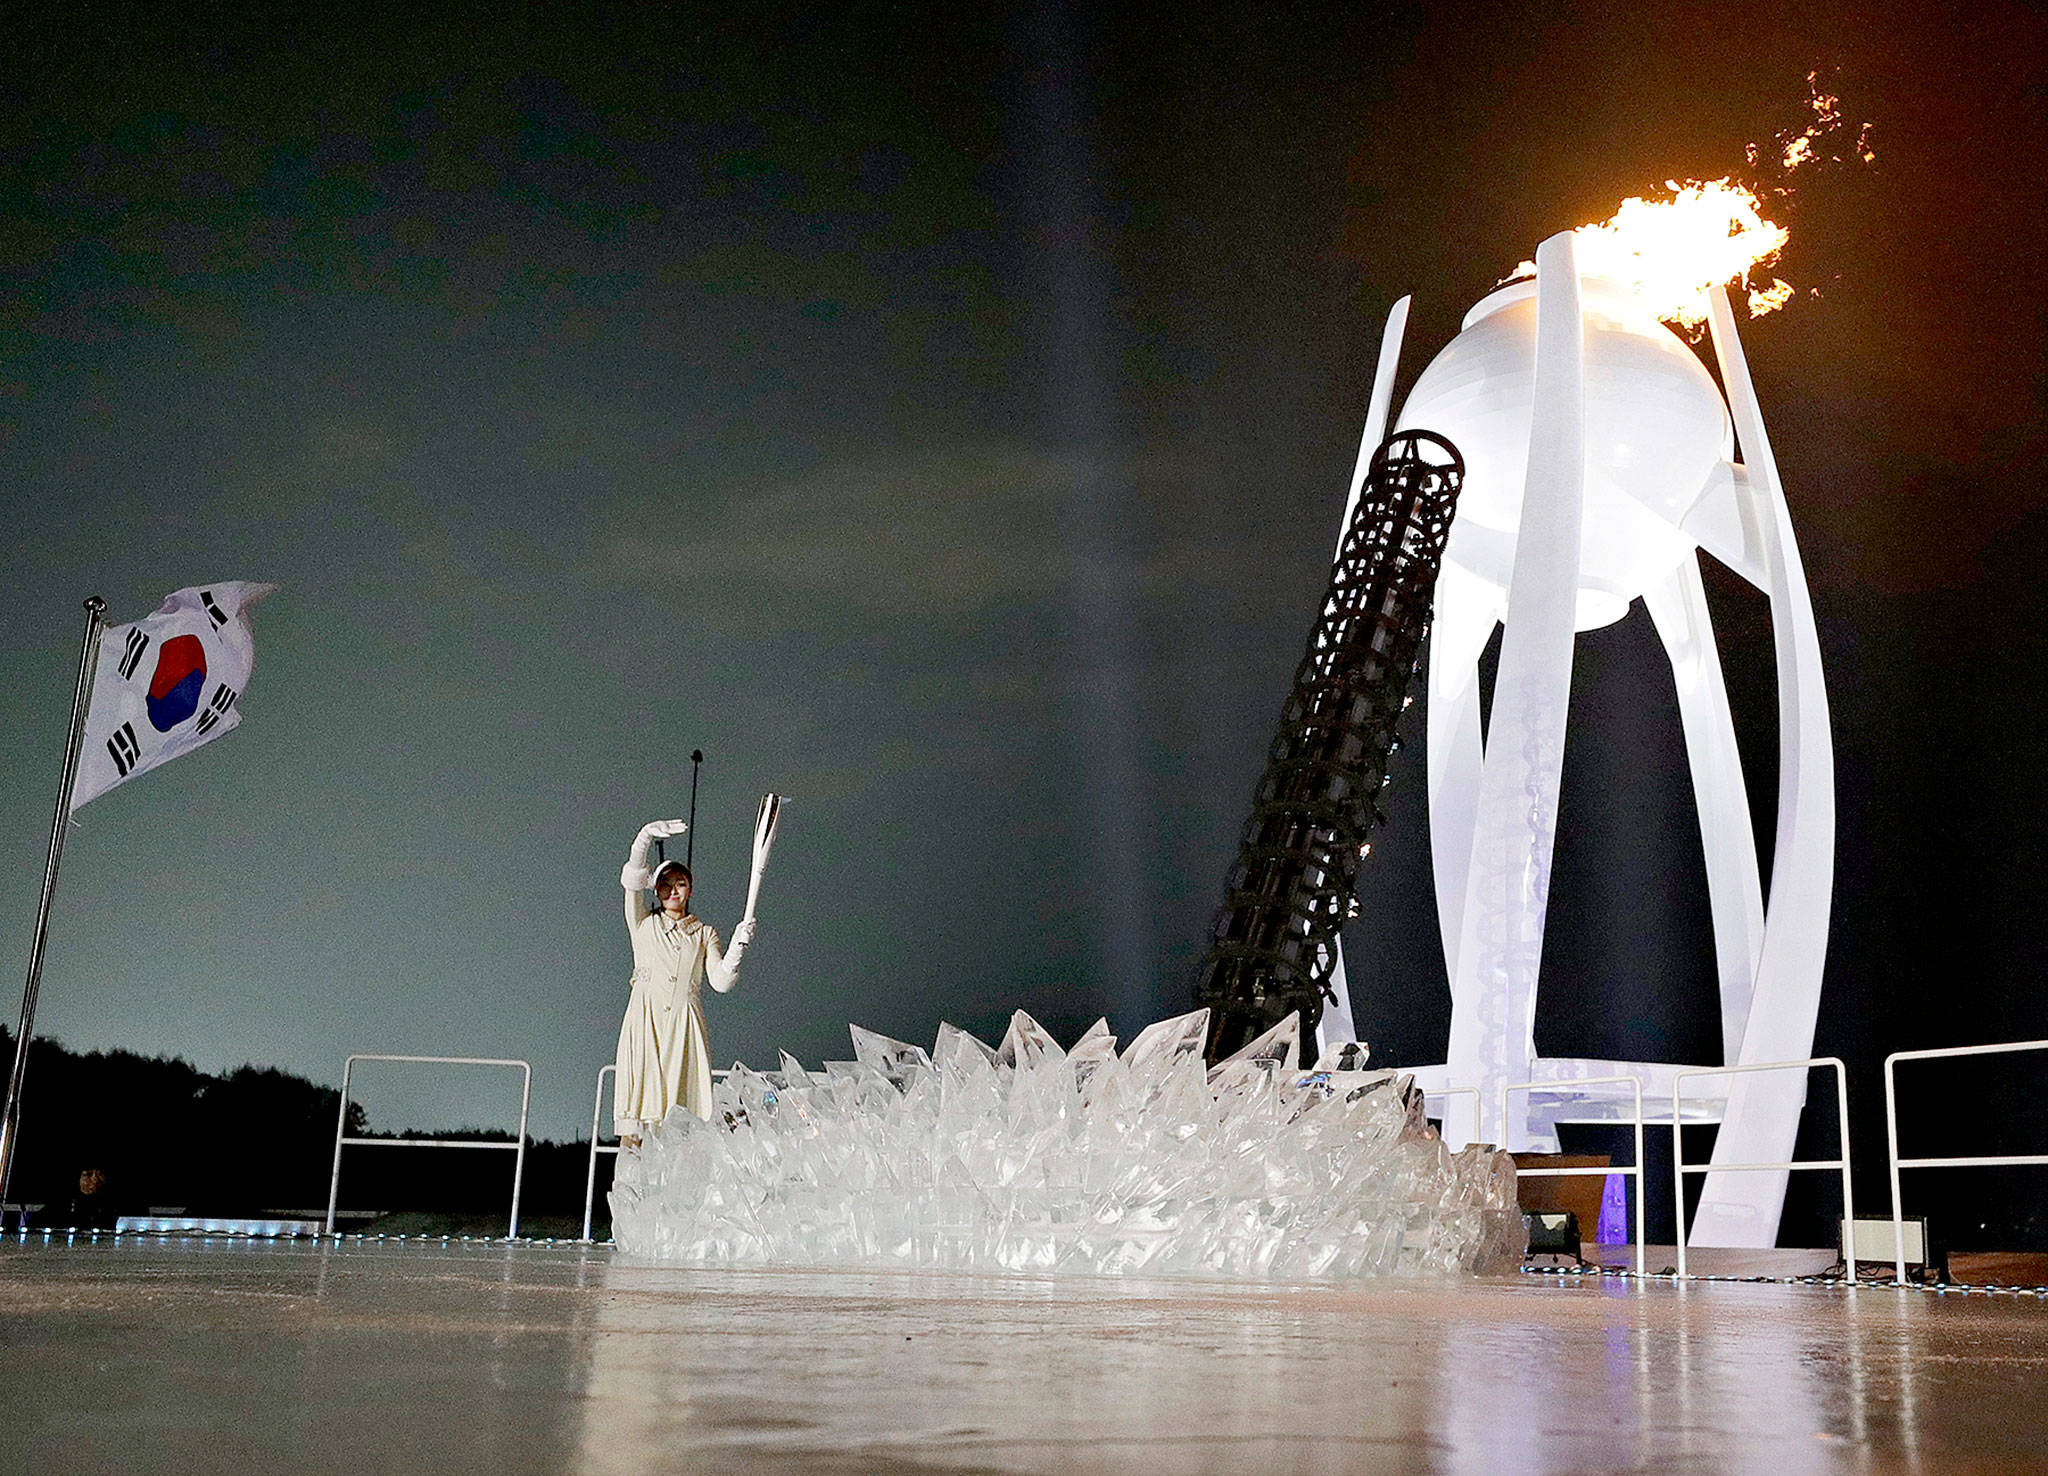 South Korean Olympic figure skating champion Yuna Kim lights the Olympic flame during the opening ceremony of the 2018 Winter Olympics in Pyeongchang, South Korea, on Friday. (AP Photo/David J. Phillip,Pool)